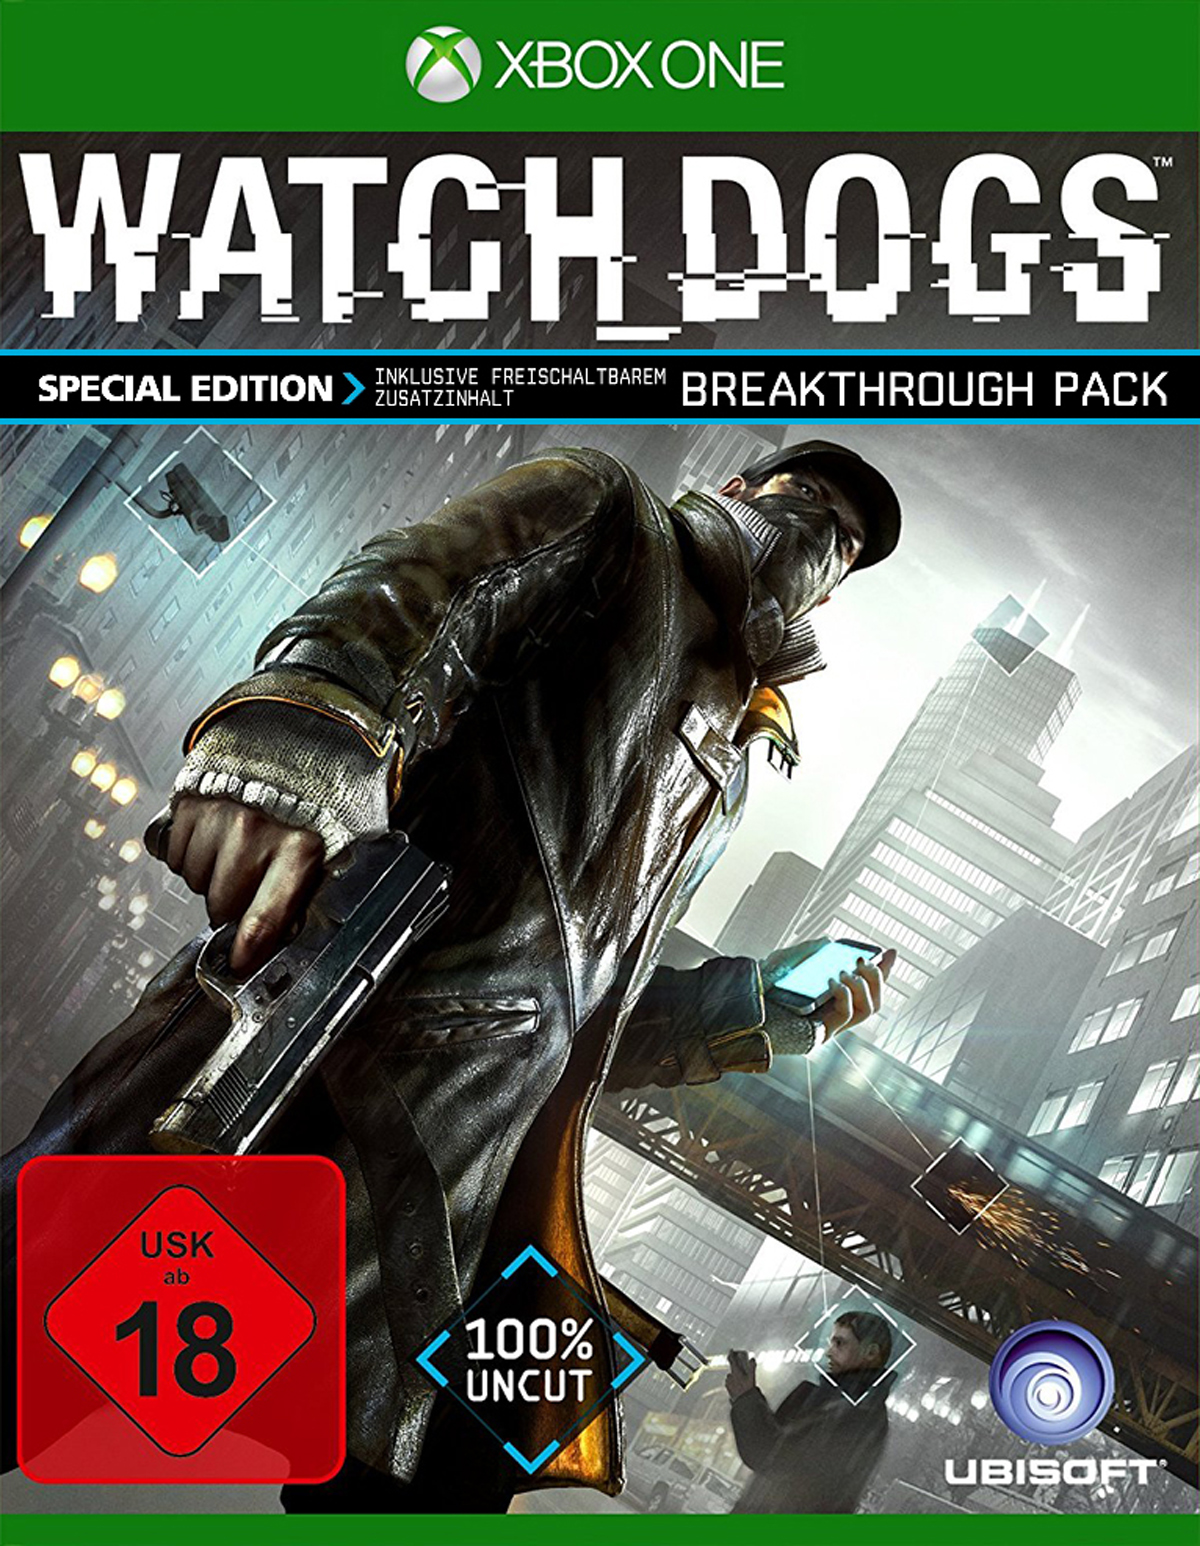 One] Dogs [Xbox Edition - Special Watch -